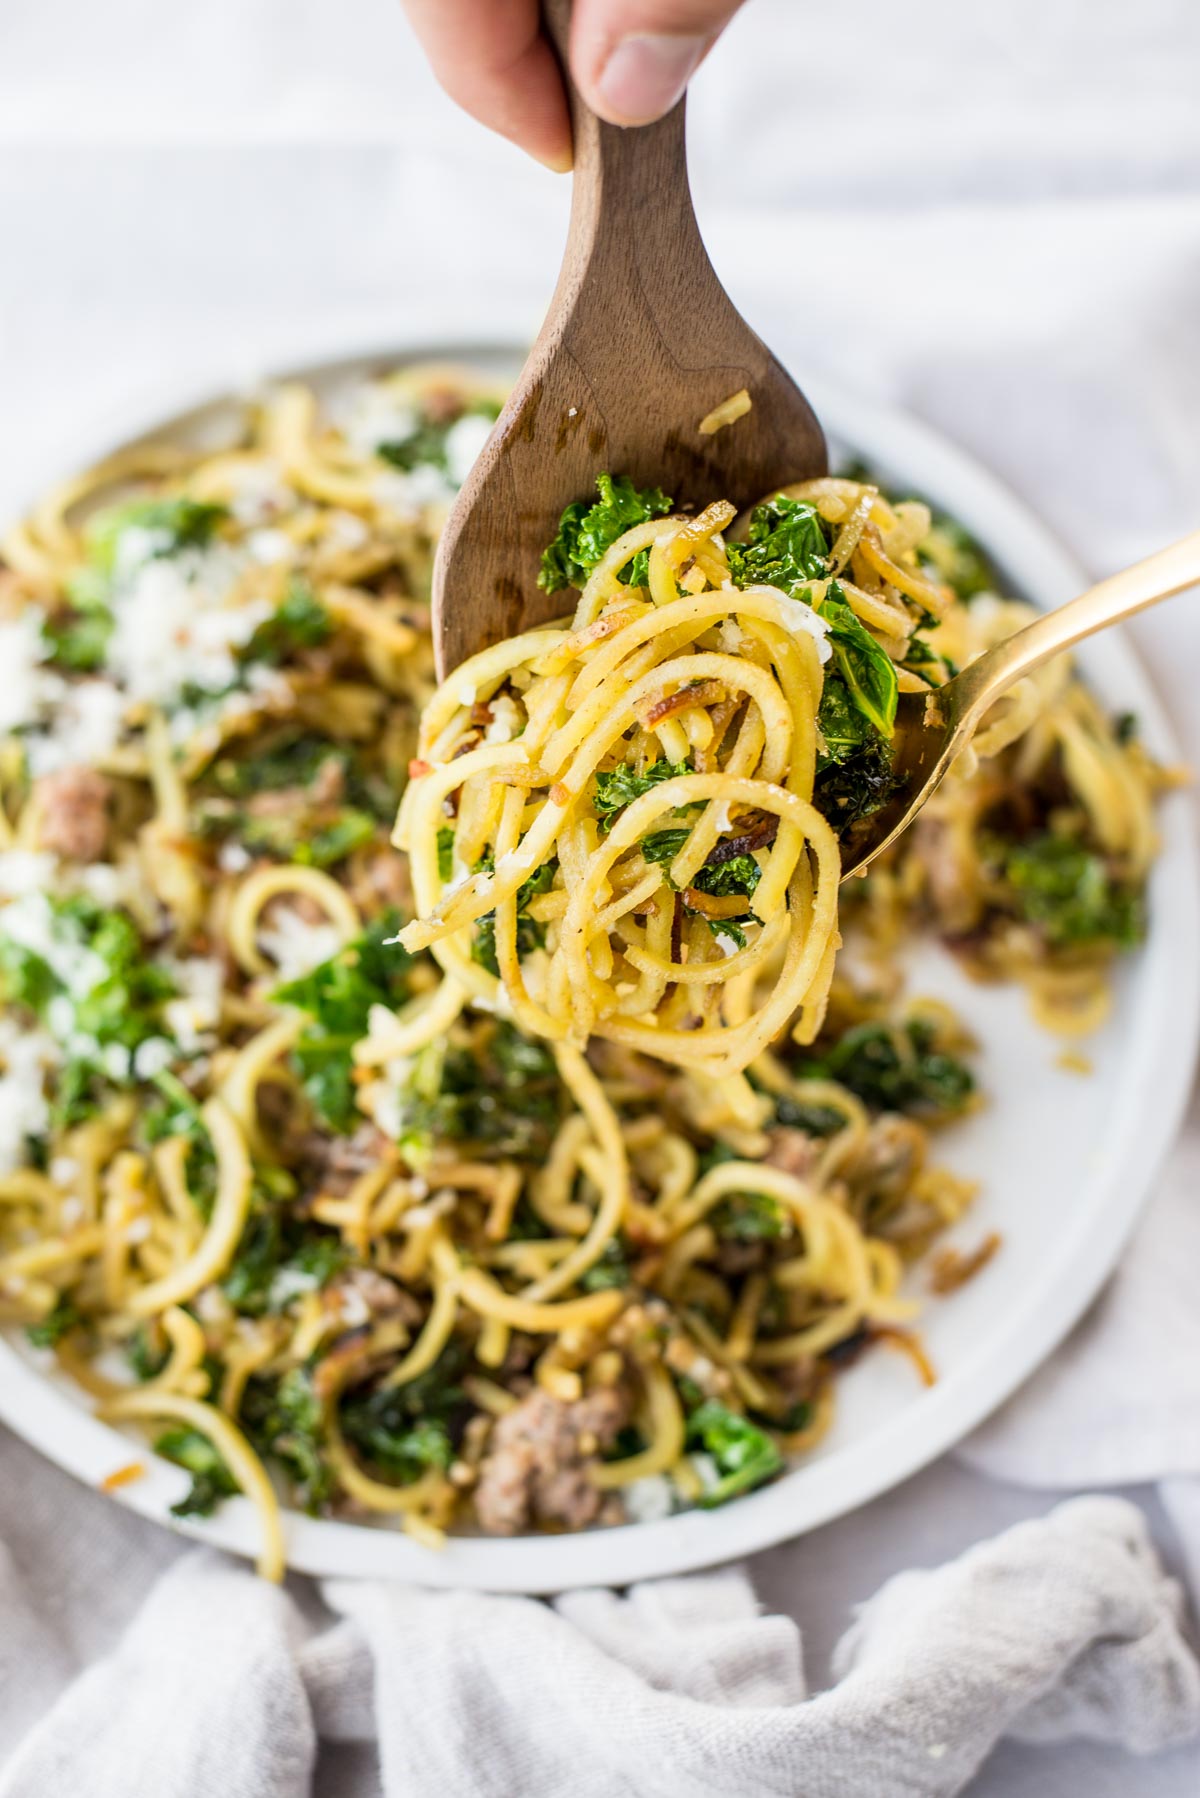 The easy spaghetti recipe you've been missing! This six ingredient spaghetti with garlic and kale is made in less than 20 minutes!